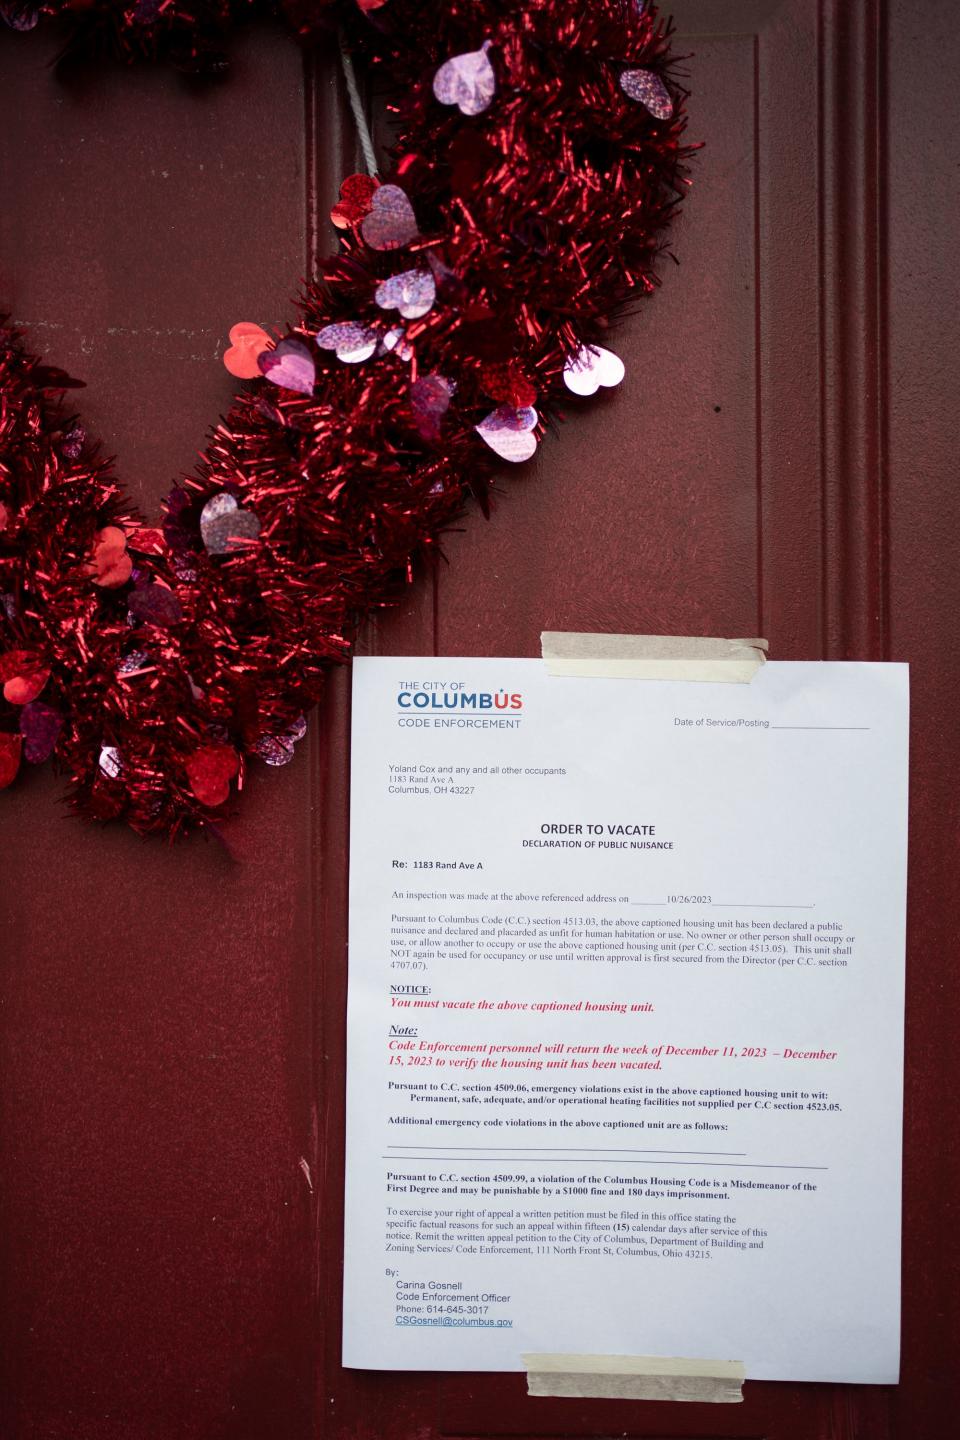 An order to vacate hangs on a door Dec. 8 in Colonial Village, noting the management has given all of its residents until Dec. 31 to find new housing. So far, the Community Shelter Board has helped 254 households relocate to hotels. It is not possible at this time to discern how many households remain because each apartment at Colonial Village is often found to be home to multiple households.